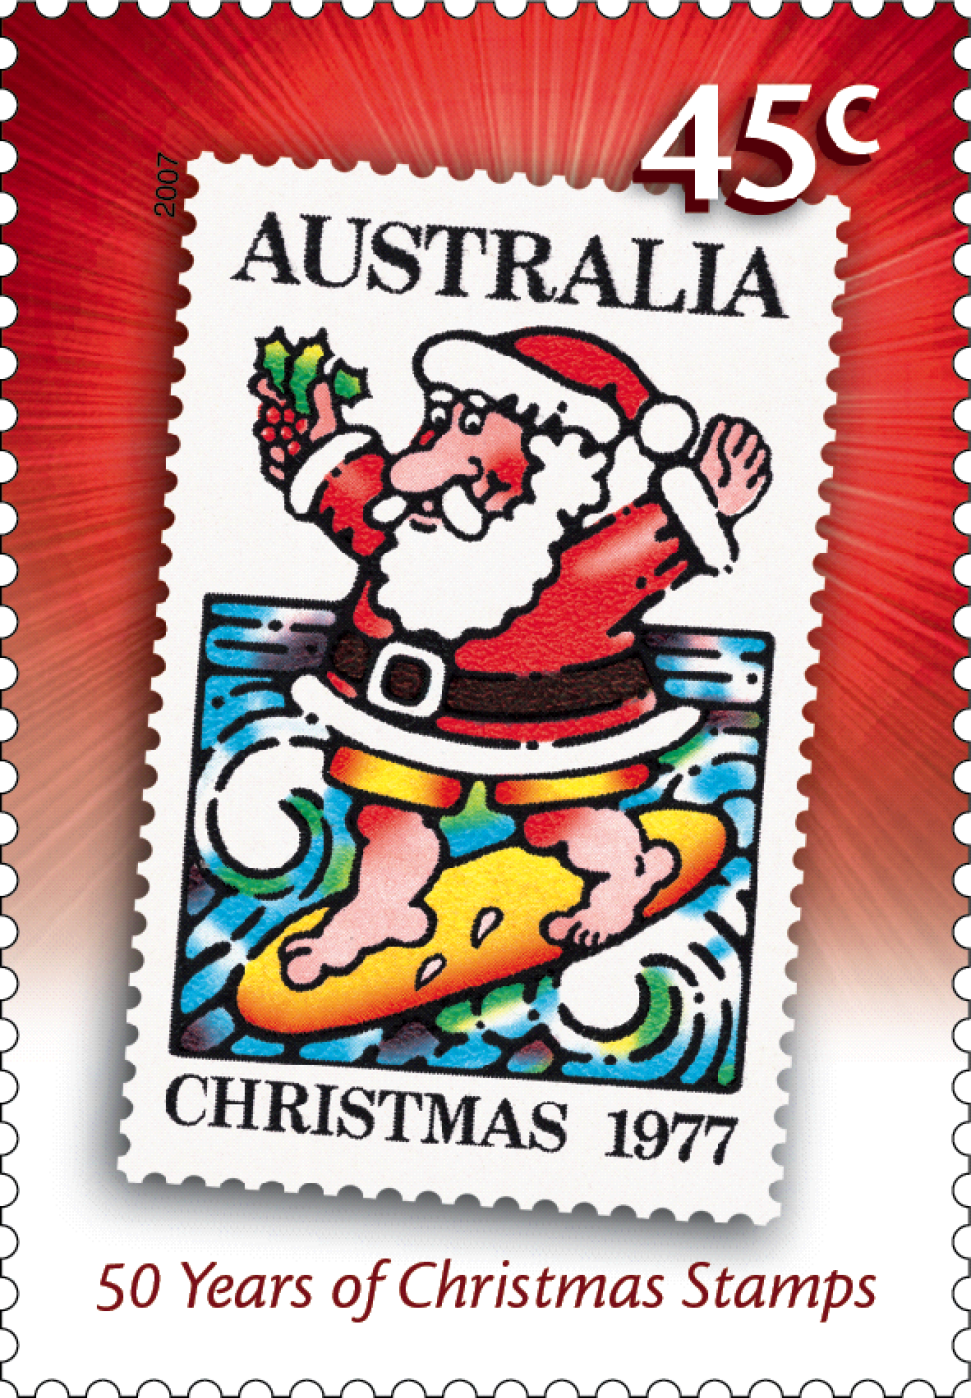 45 cent stamp from 2007 depicting the surfing  Santa from 1977